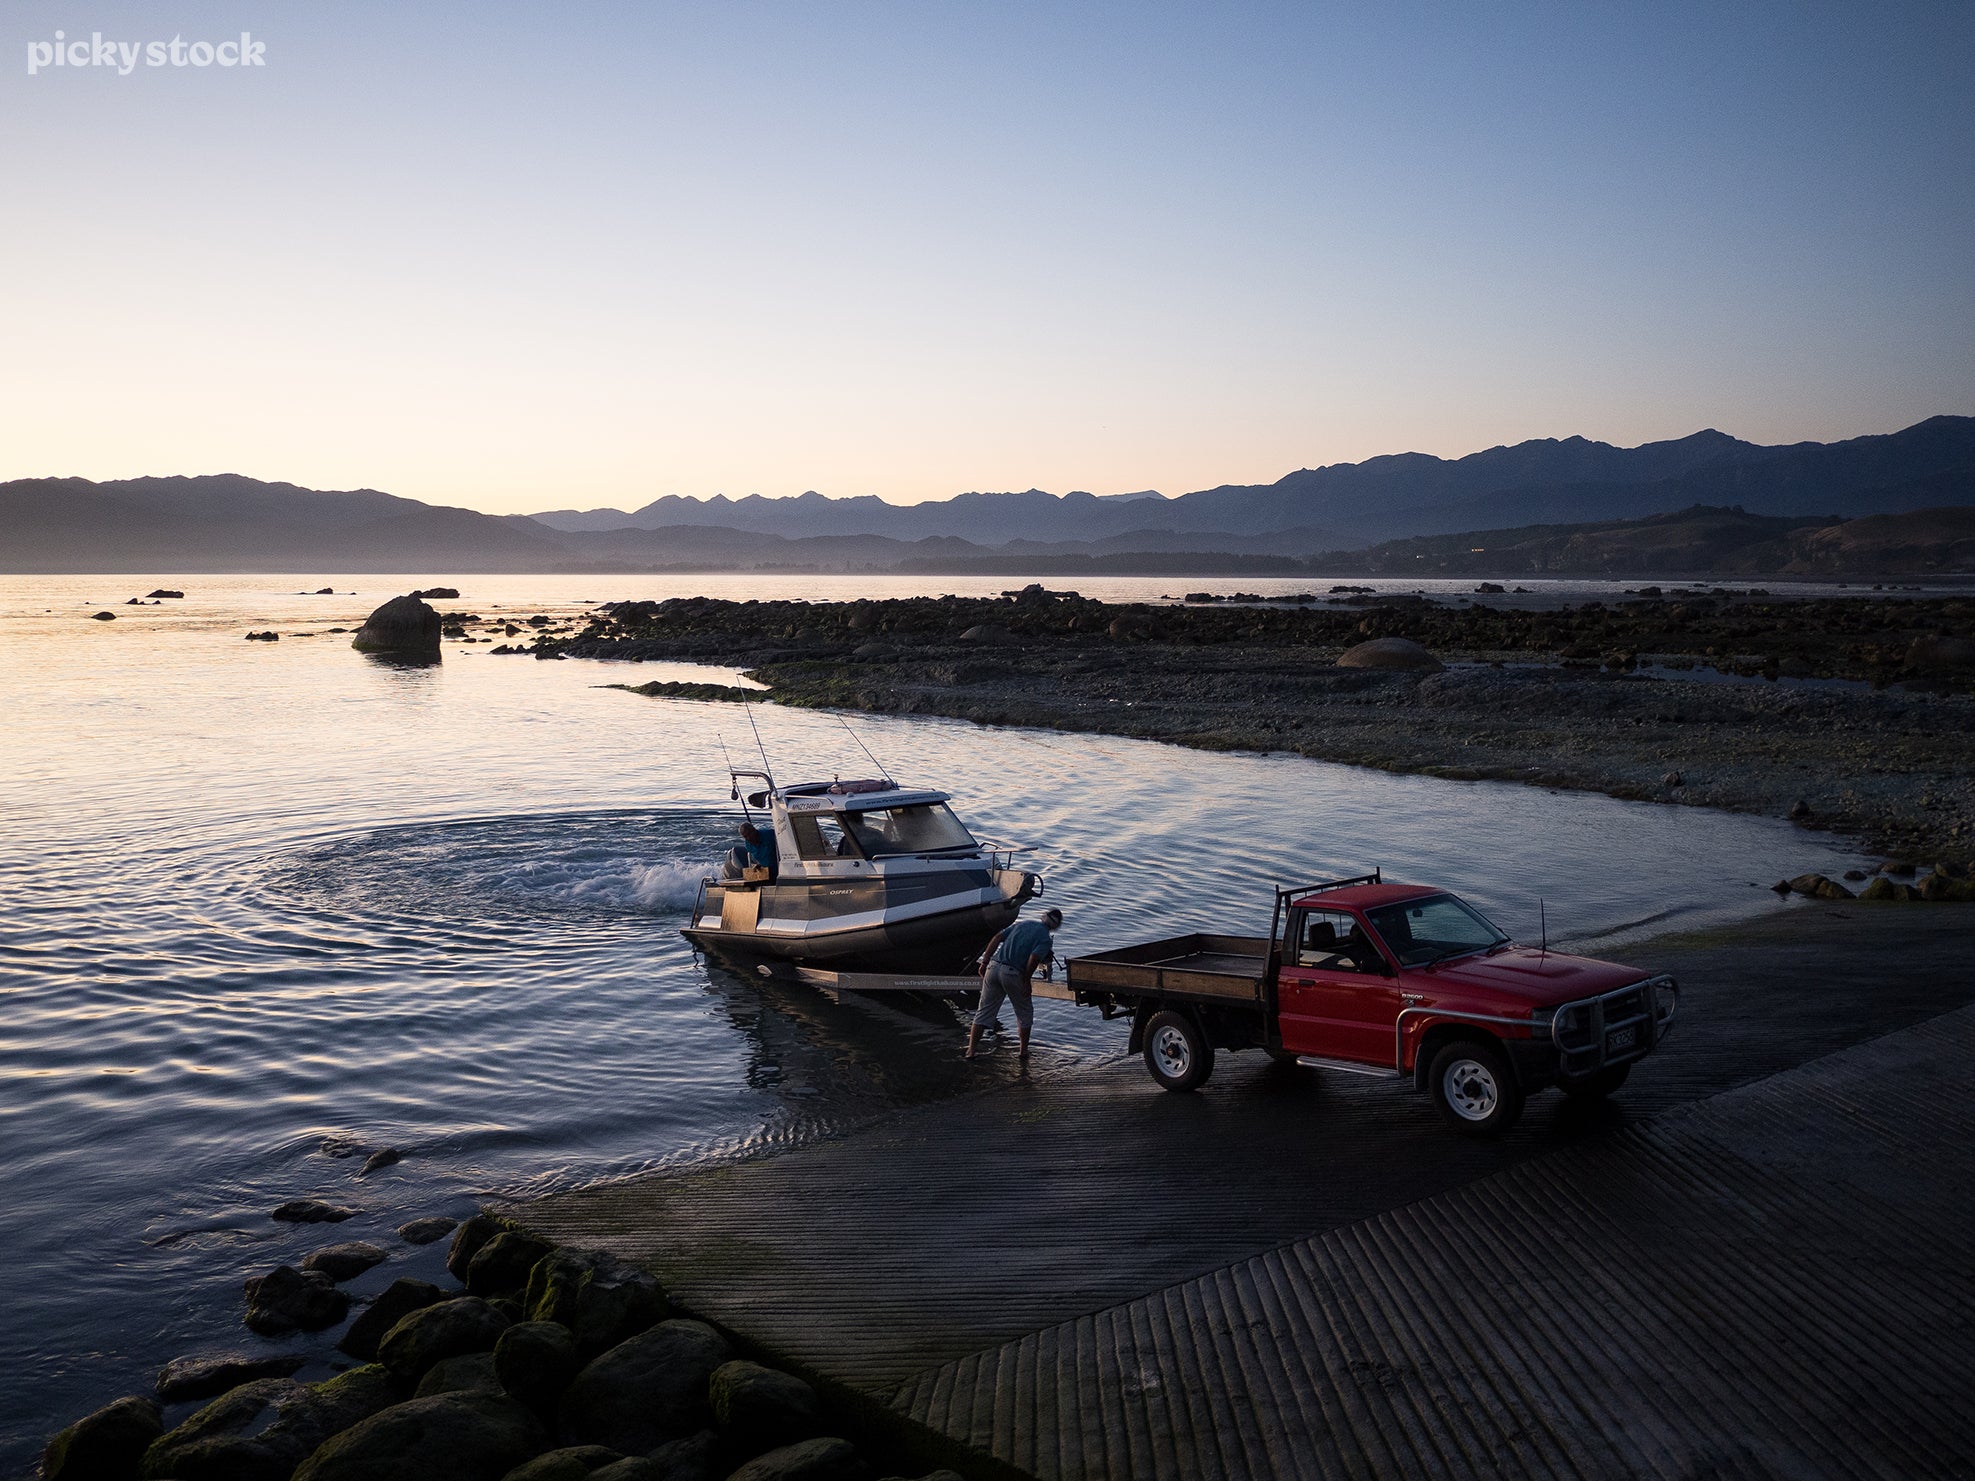 The landscape of a group of men loads a boat onto a trailer from the water's edge while one ma operates the wench. The boat trailer is attached to a red ute parked on a concrete jetty.